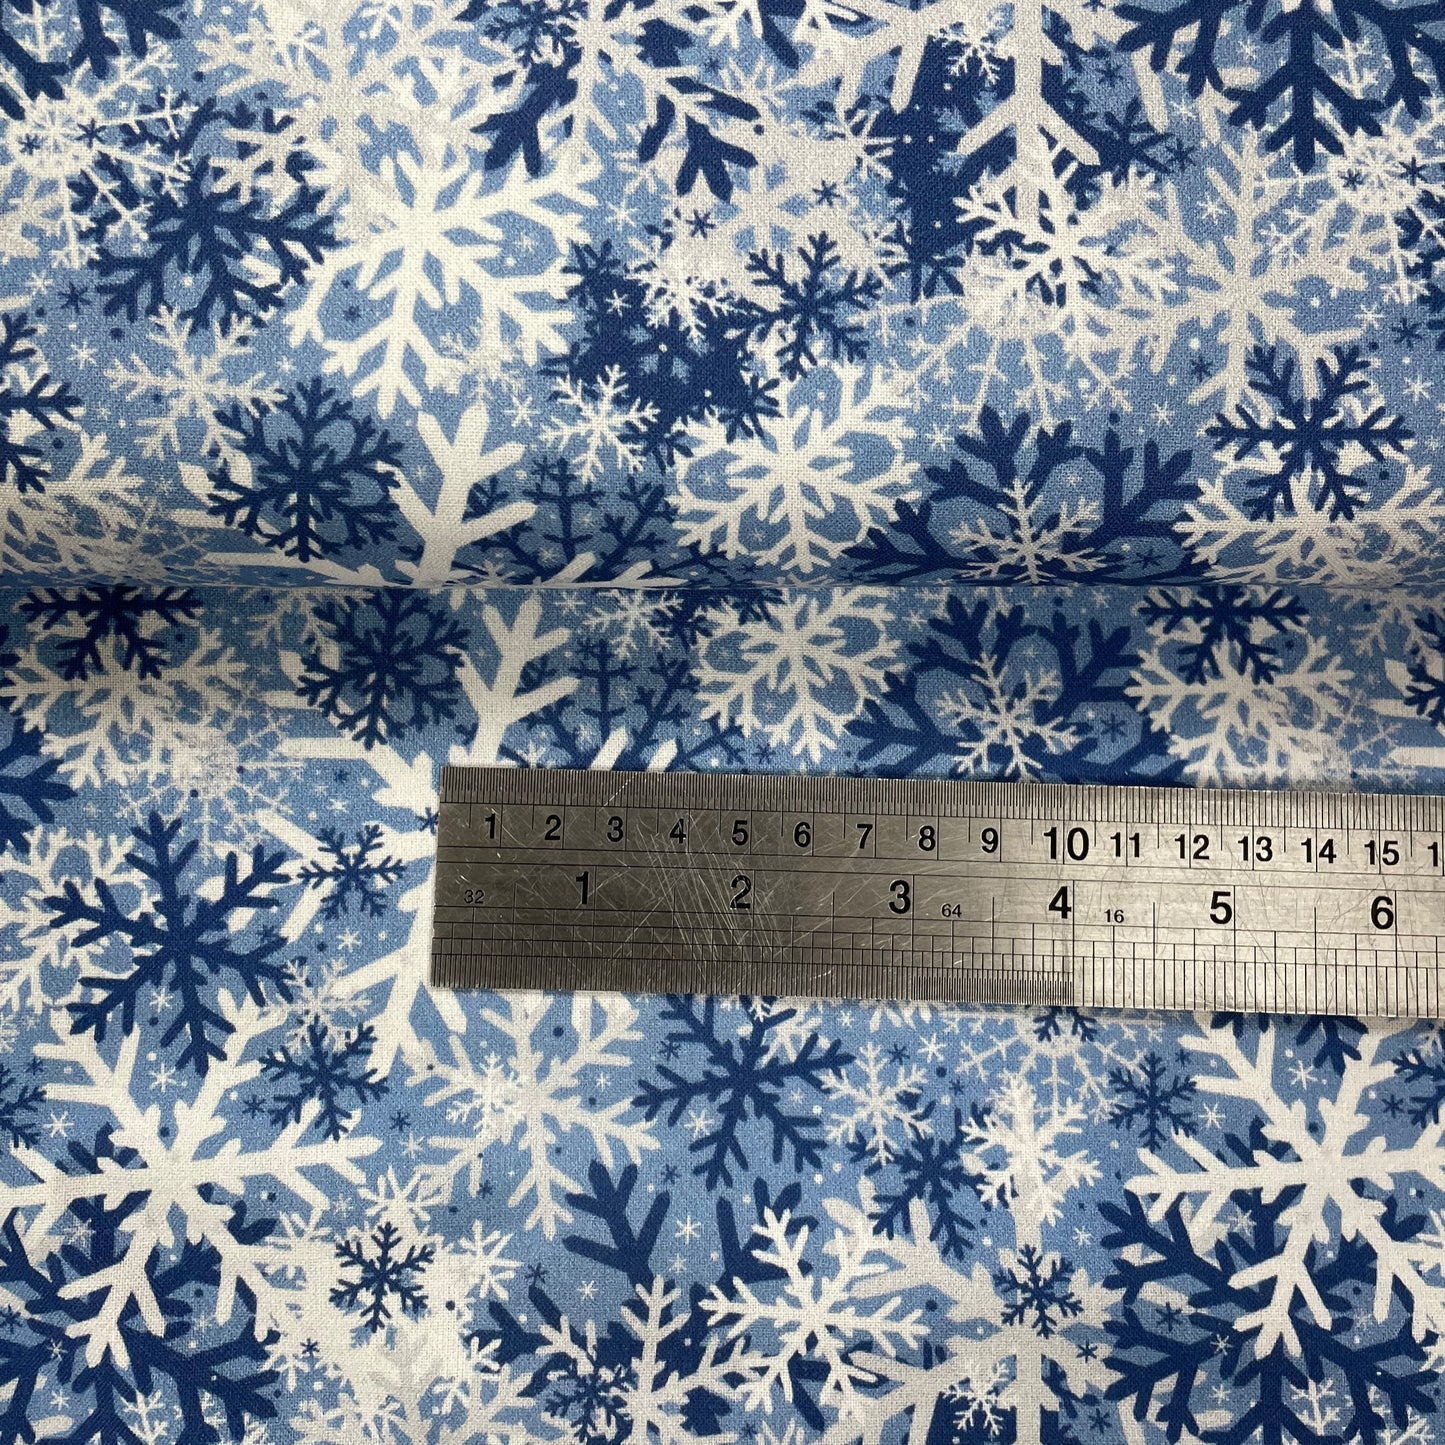 Crafty Fabrics Snowflakes on Red or Blue Christmas 100% Craft Cotton Fabric